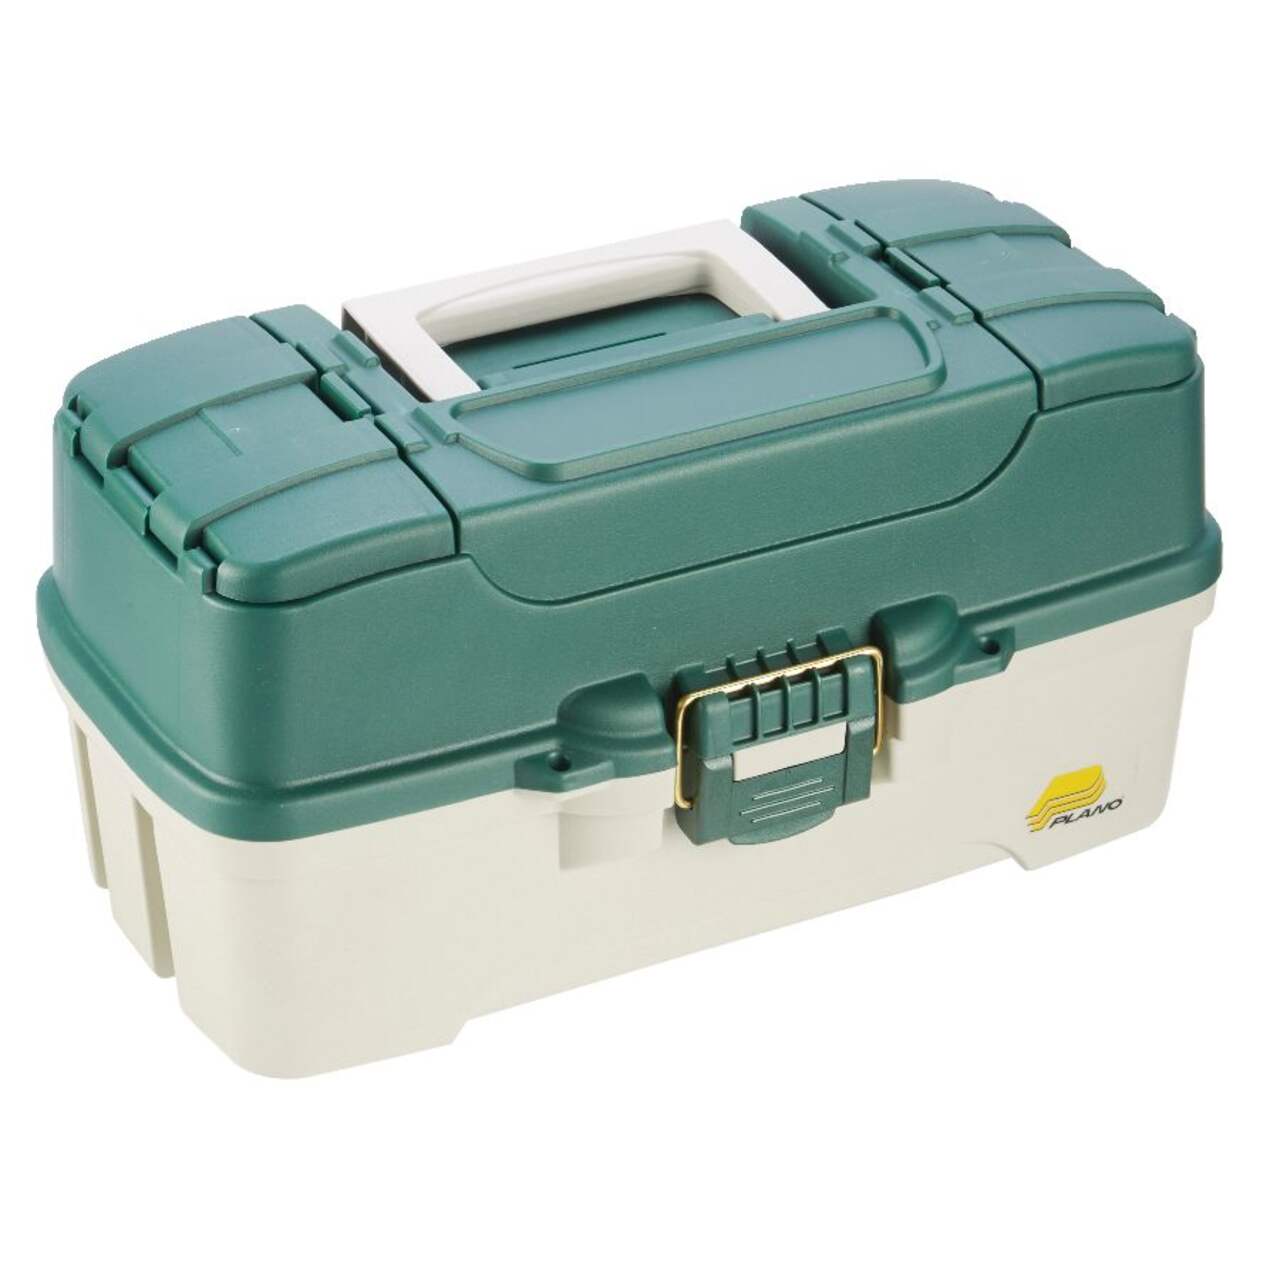 Plano Guide Series™ Premium 3 Tray Tackle Box with comfortable handle